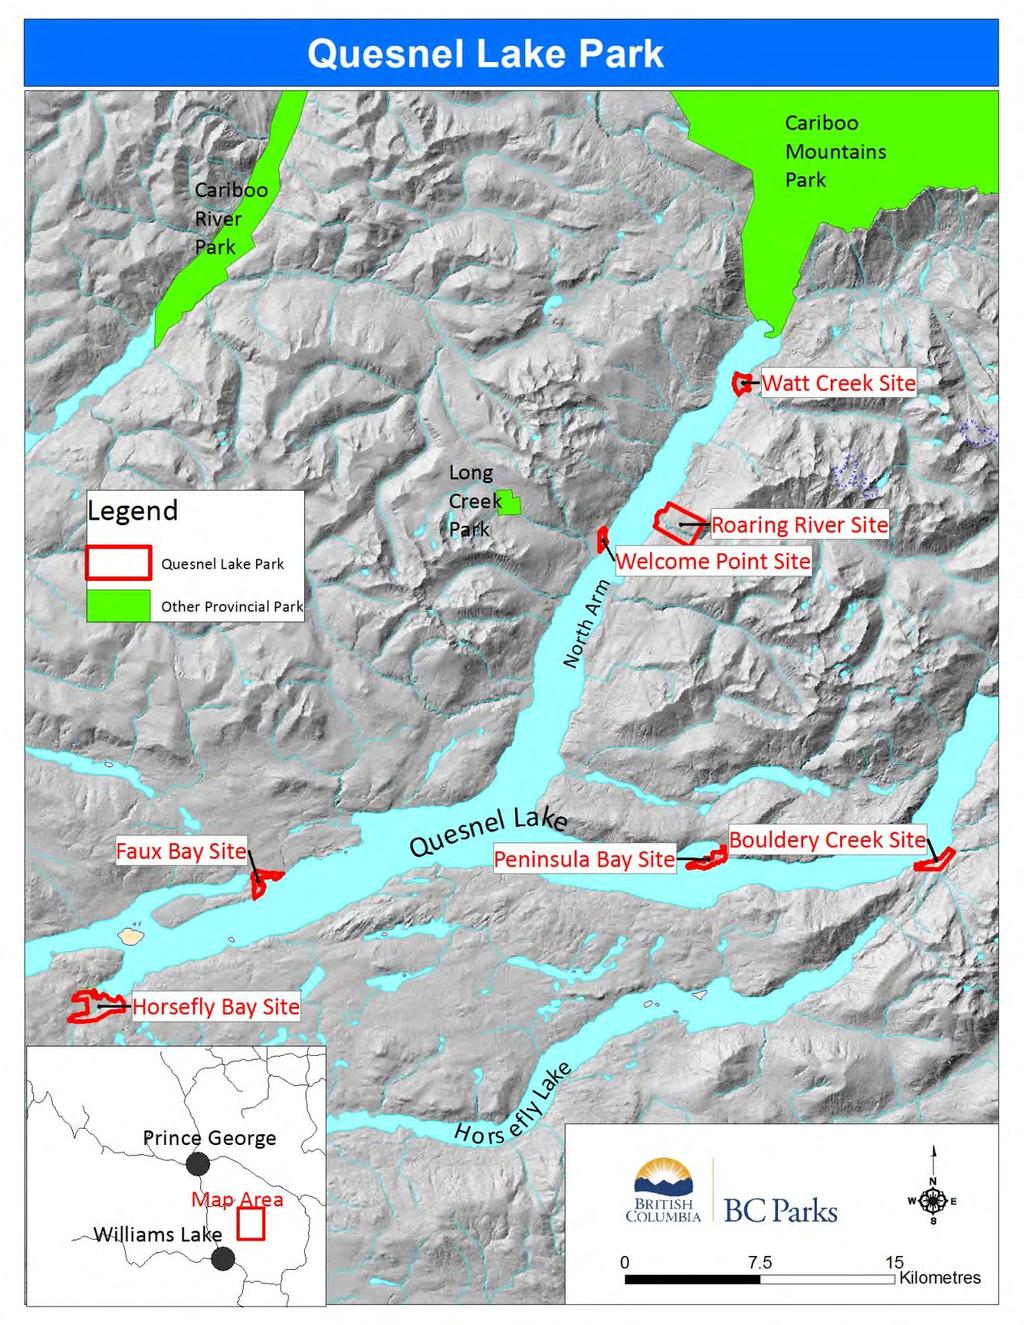 Figure 2: Map of Quesnel Lake Park